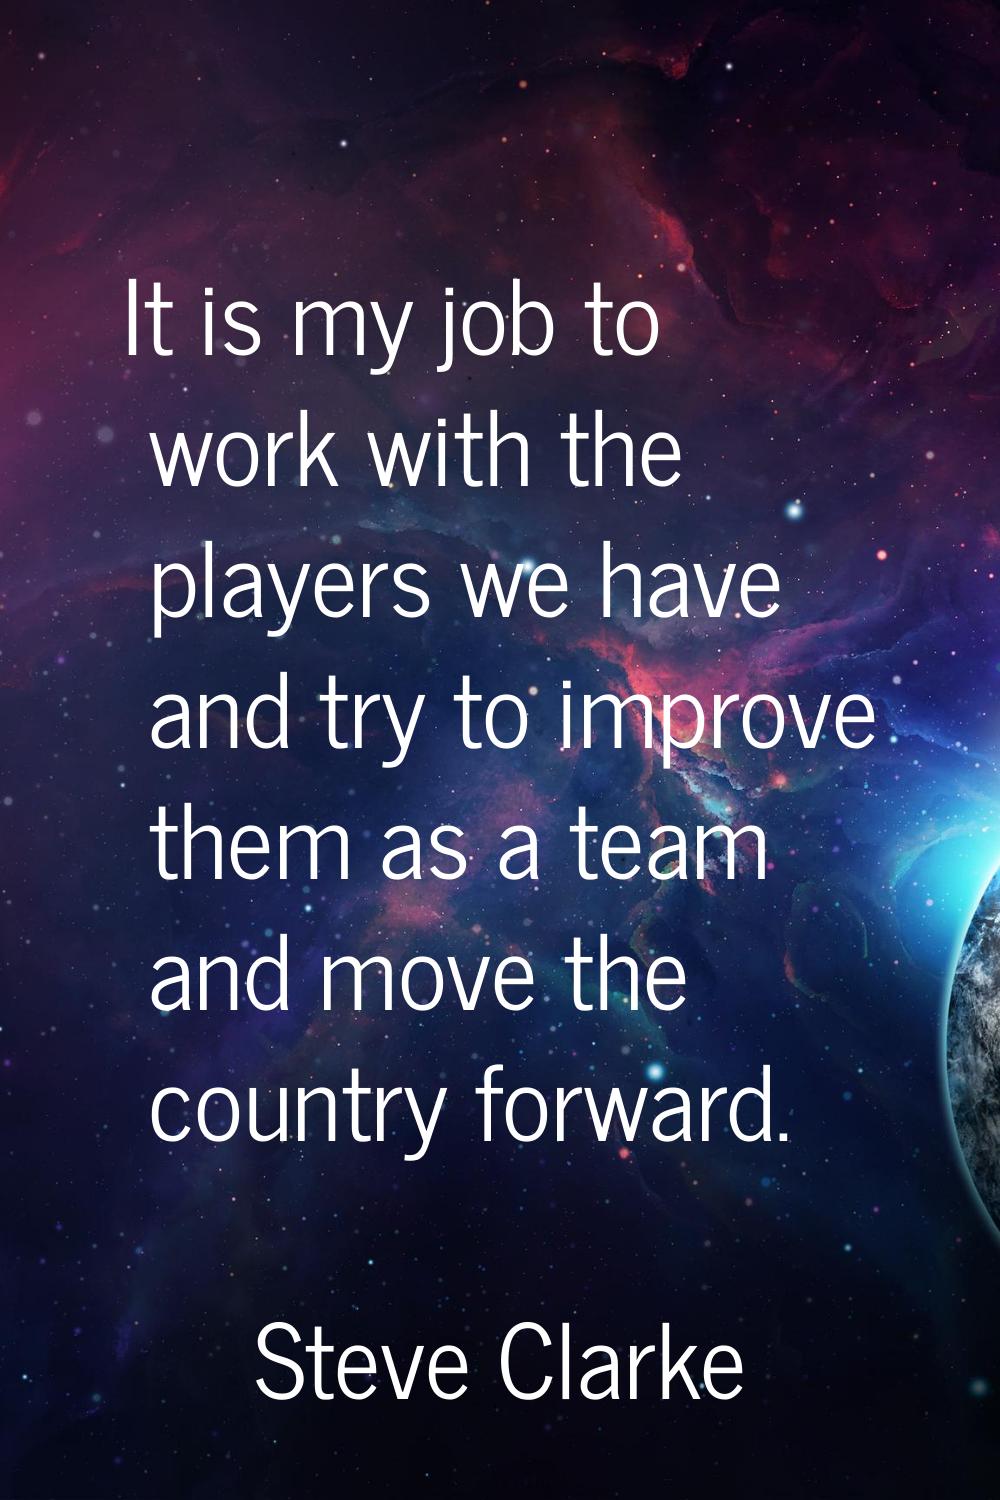 It is my job to work with the players we have and try to improve them as a team and move the countr